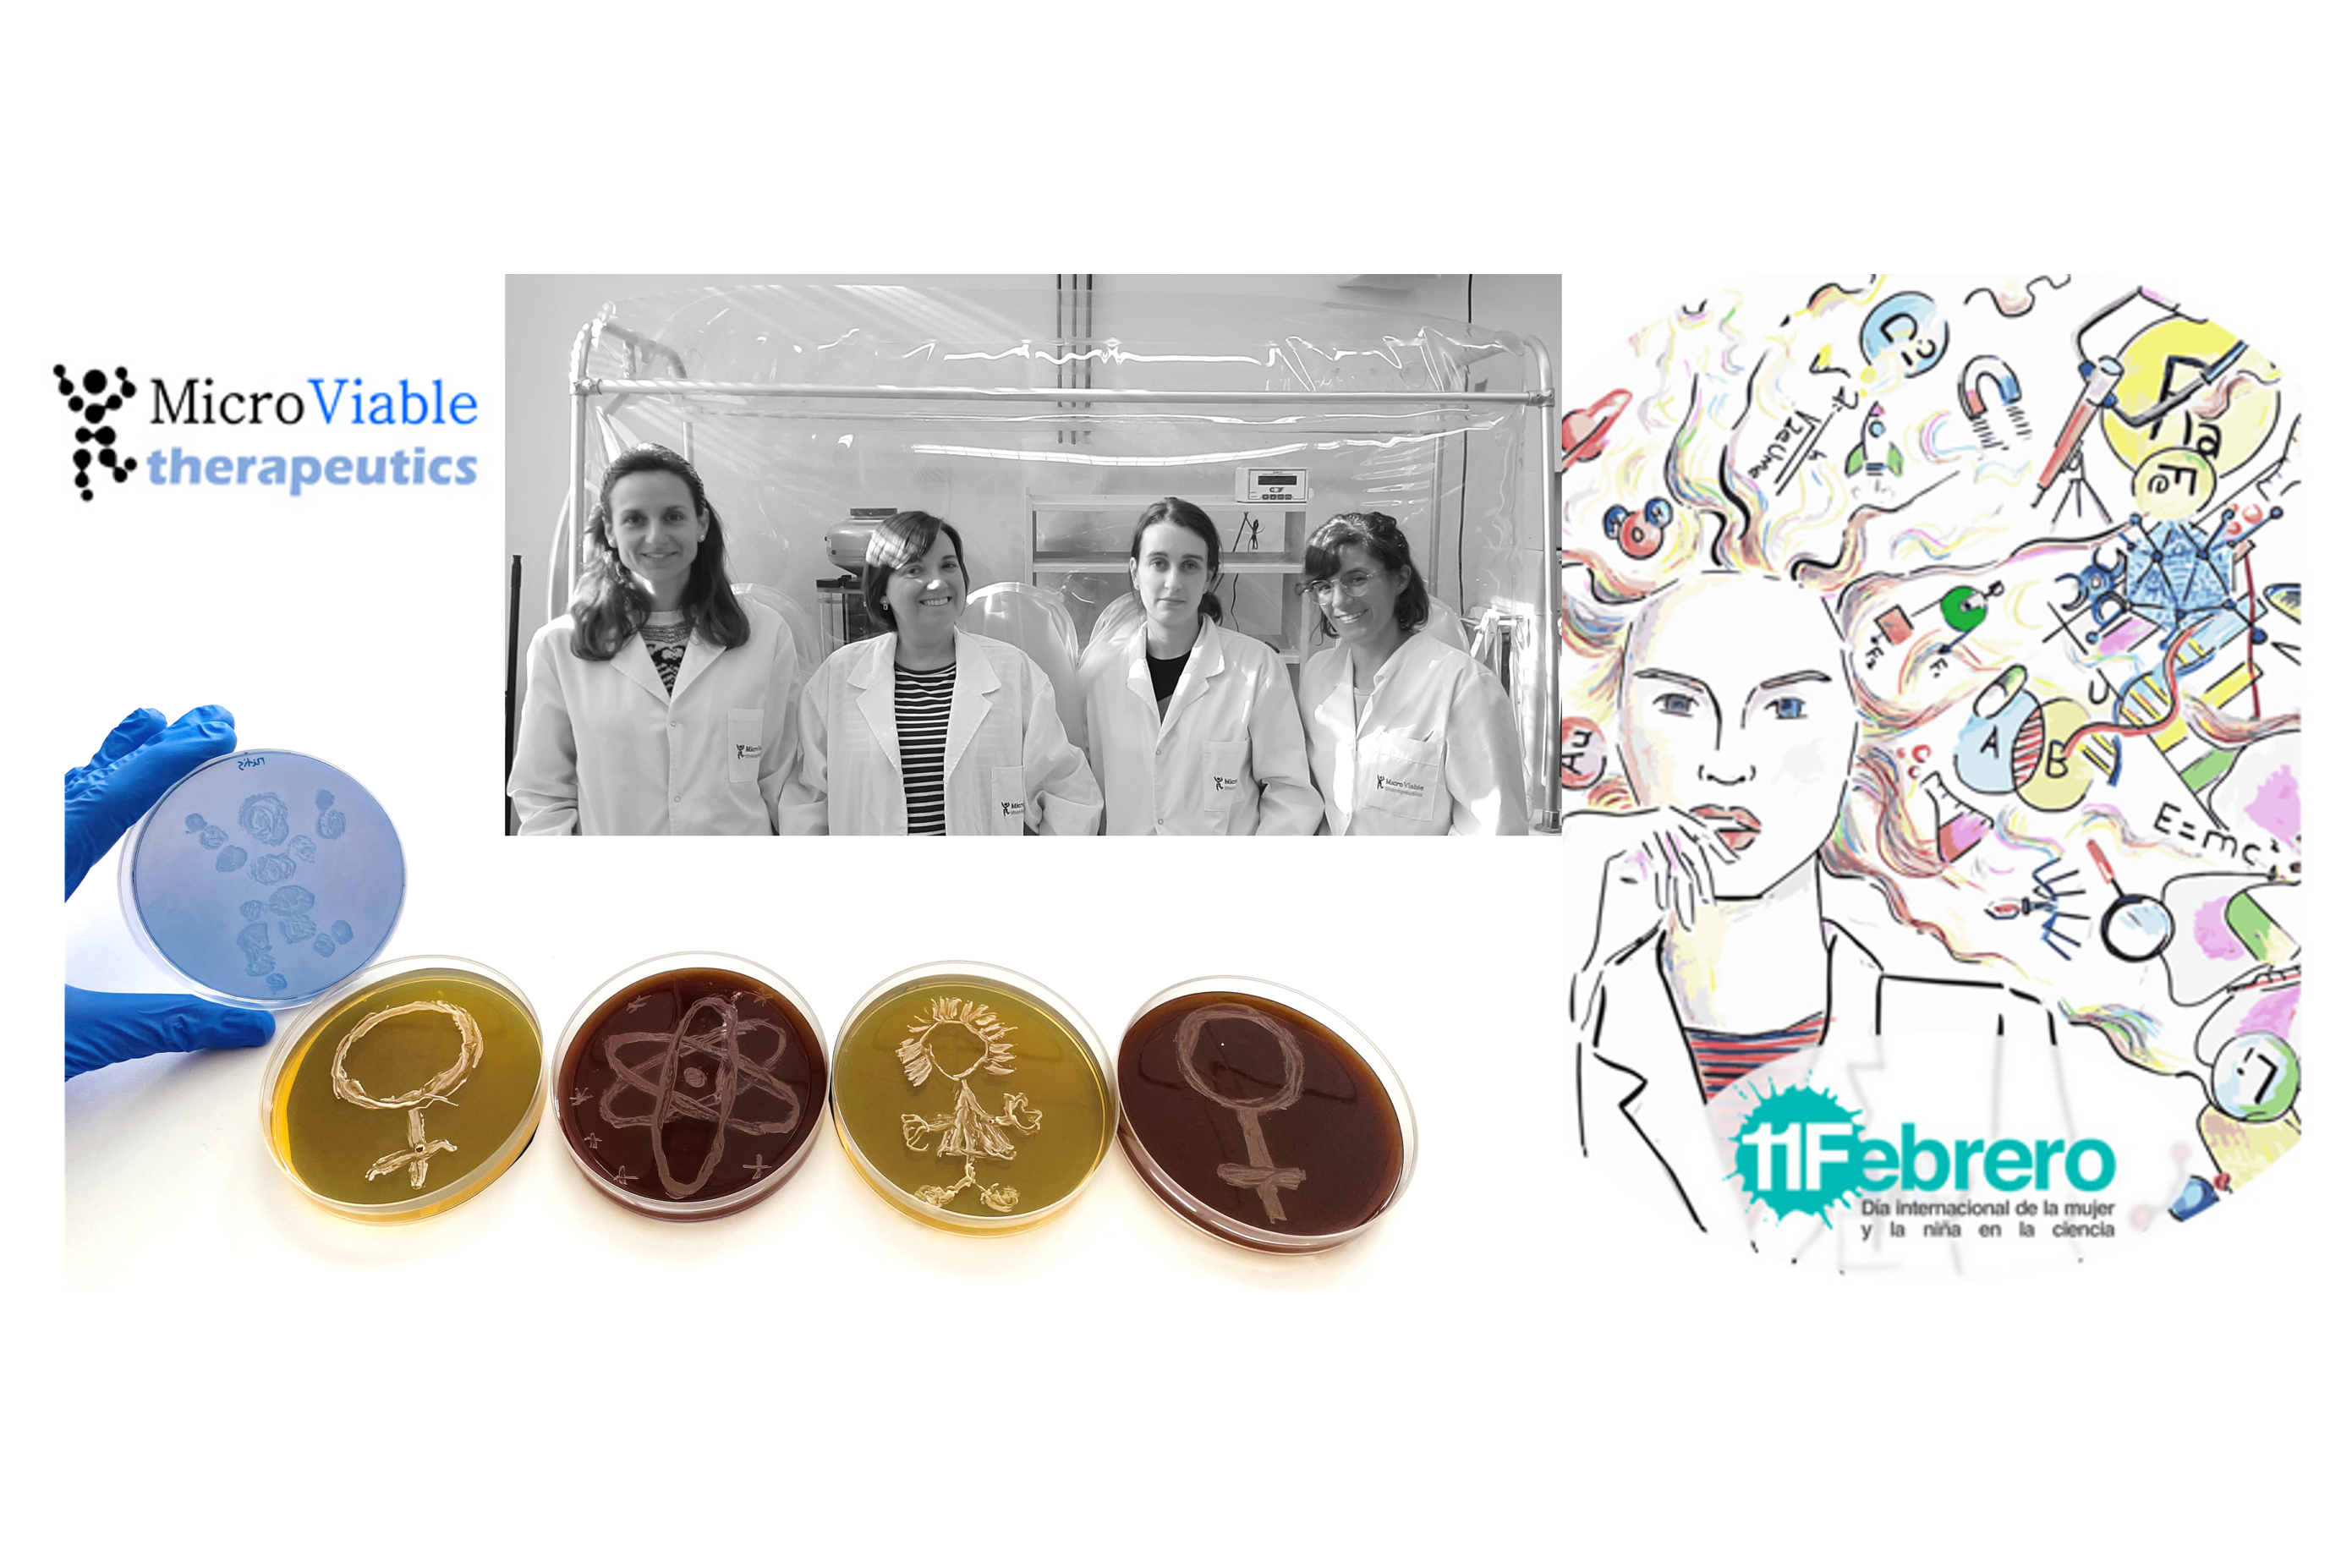 Microviable Therapeutics is celebrating World Microbiome Day 2023